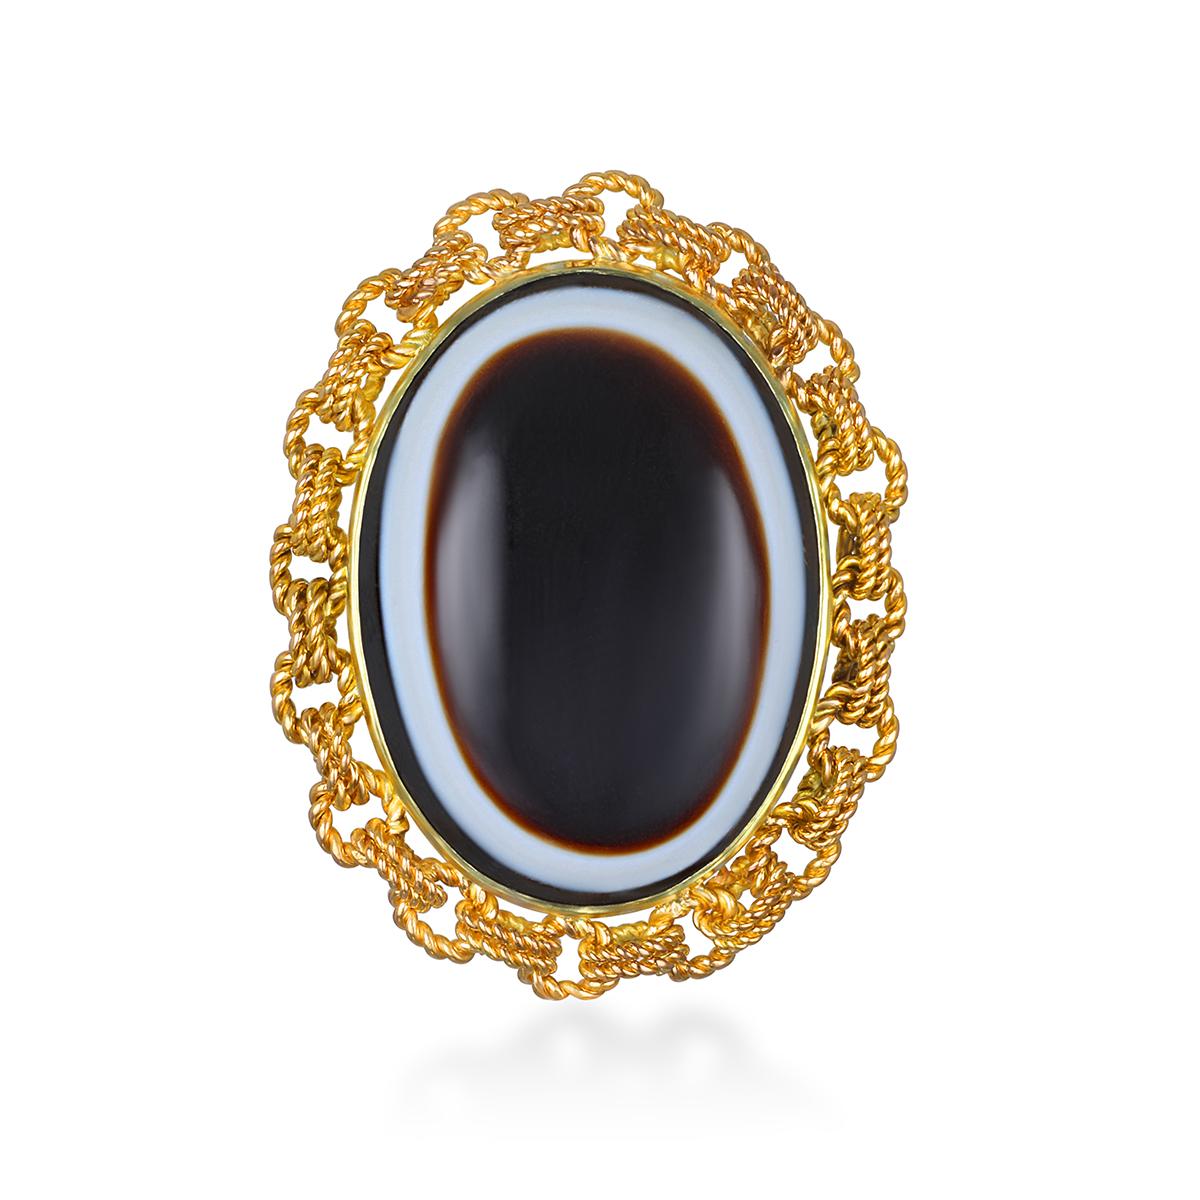 Faye Kim's 18 Karat Yellow Gold Vintage Banded Agate Ring, with its unique roped frame setting and split shank, blends the past with the present. The oval cabochon's rich tones marry beautifully with the intricate gold frame, resulting in a piece